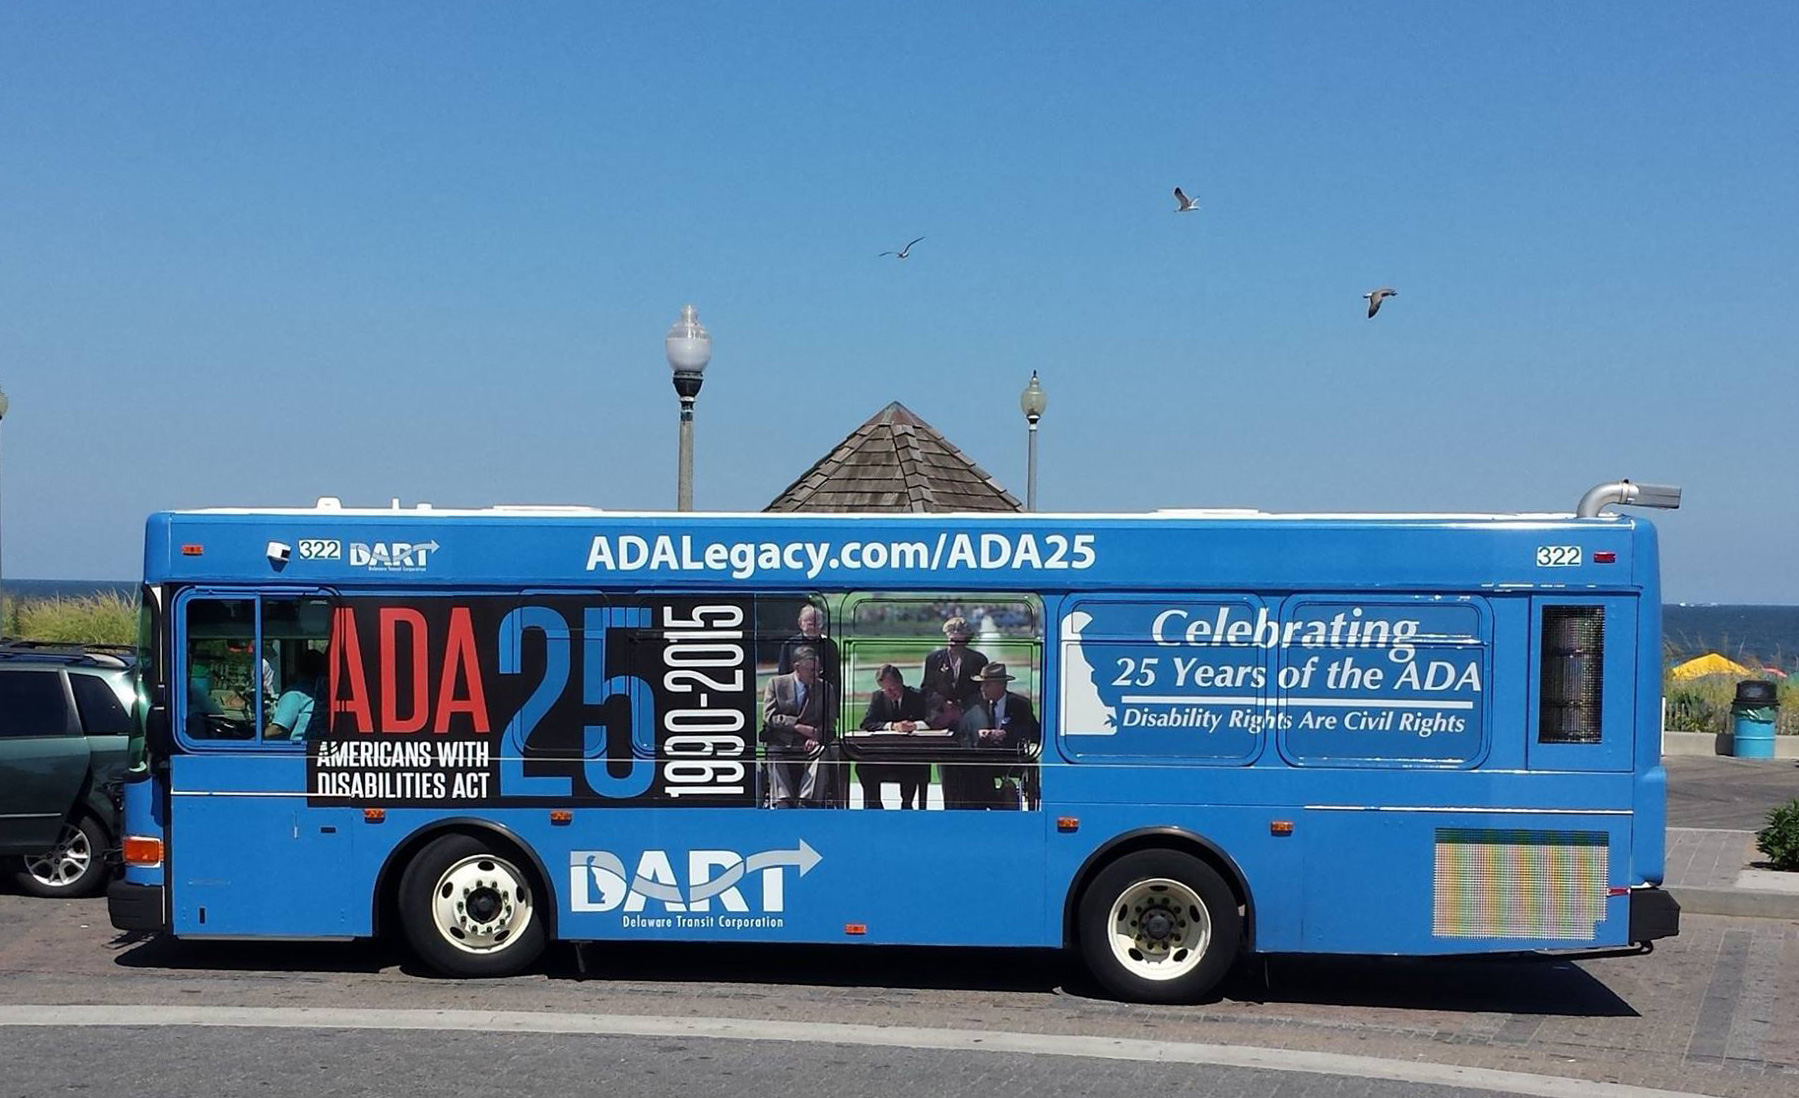 A bus of Delaware Department of Transportation celebrating the ADA 25